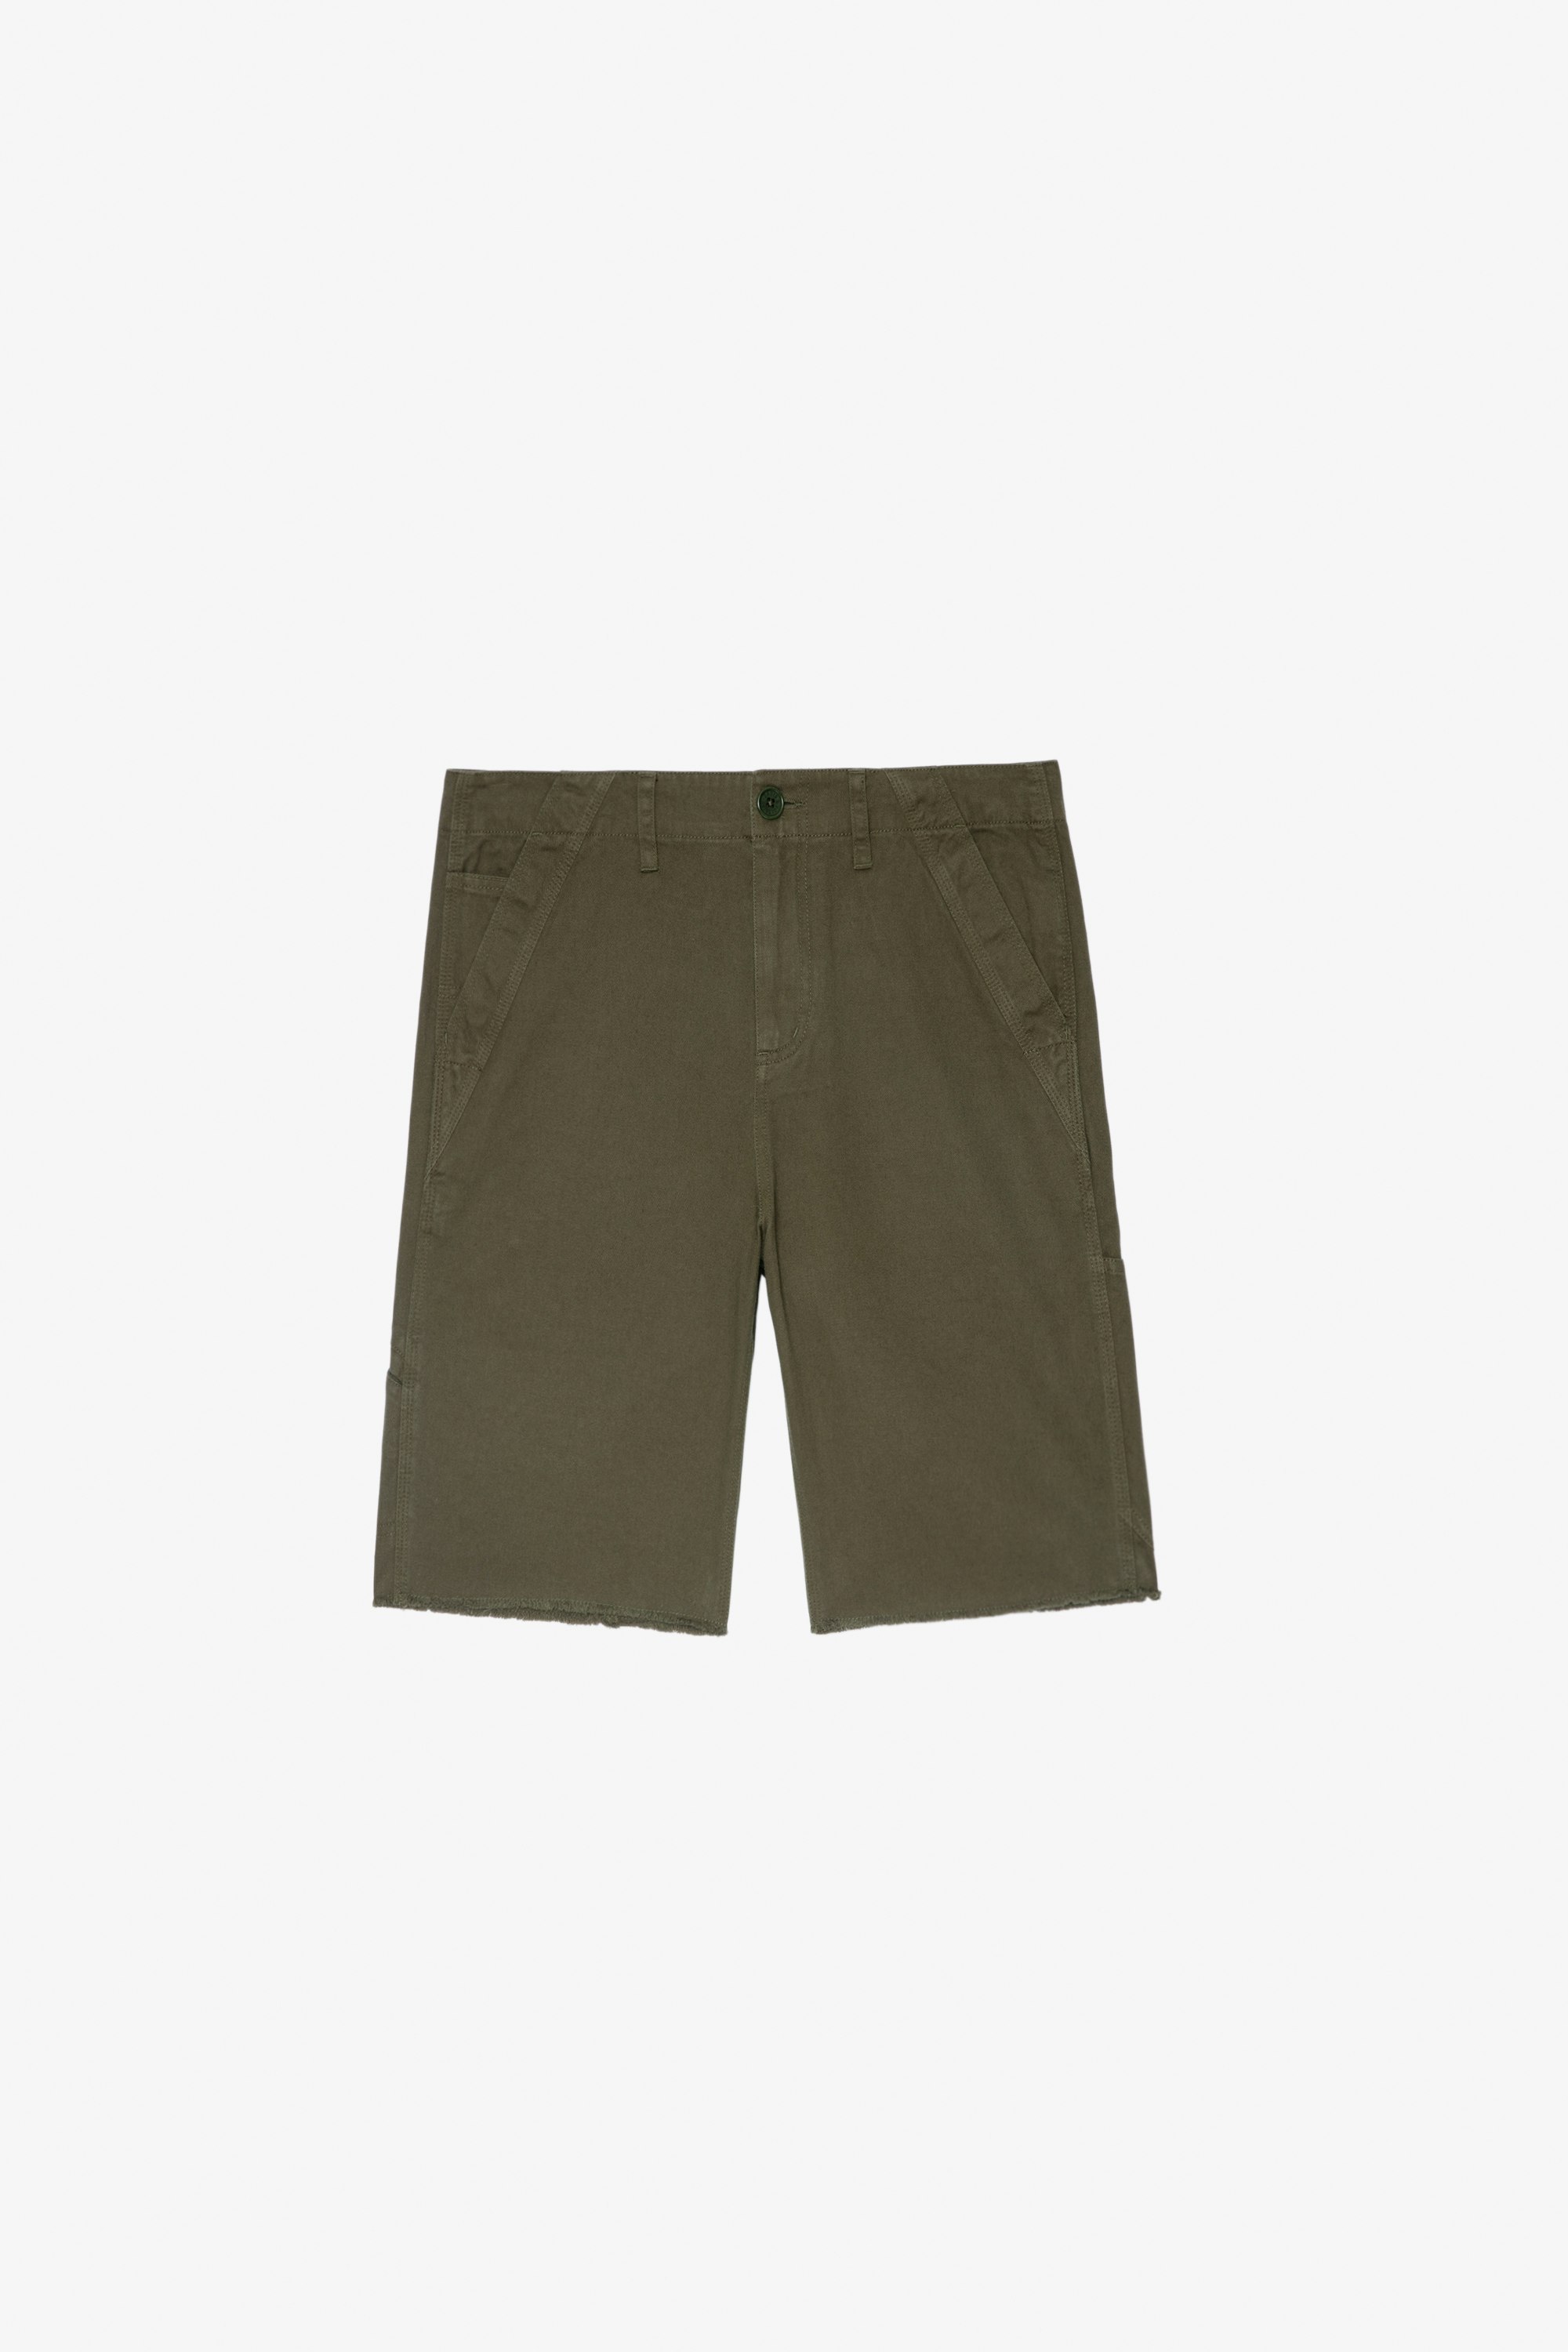 Parks Shorts Men's cargo shorts in khaki cotton with multiple pockets